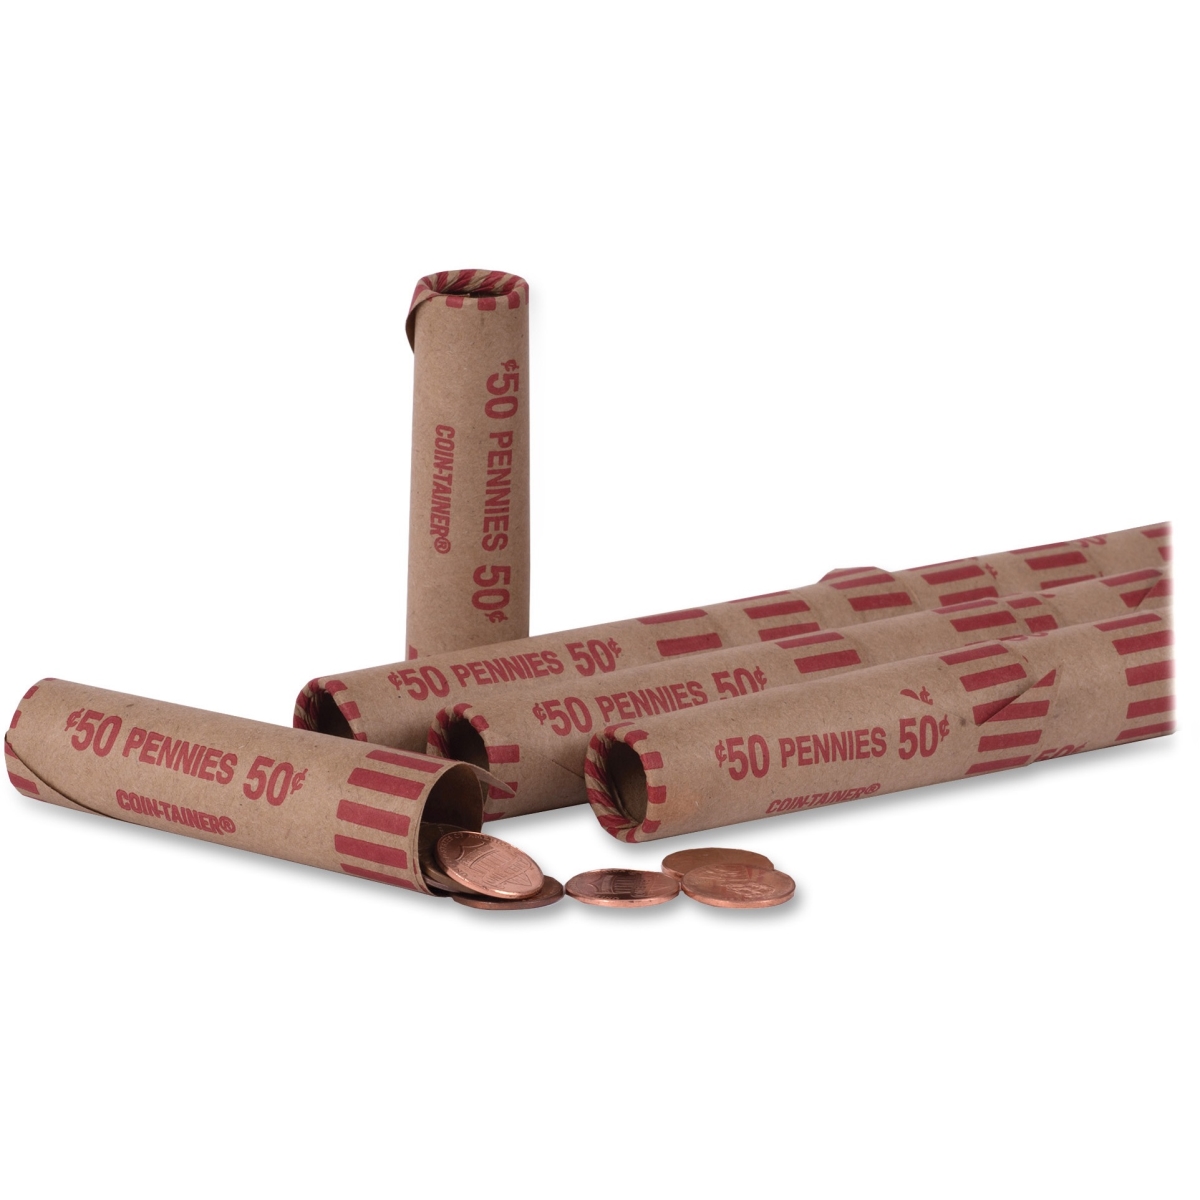 Ctx23001 Nest Penny Coin Wrapper - Red